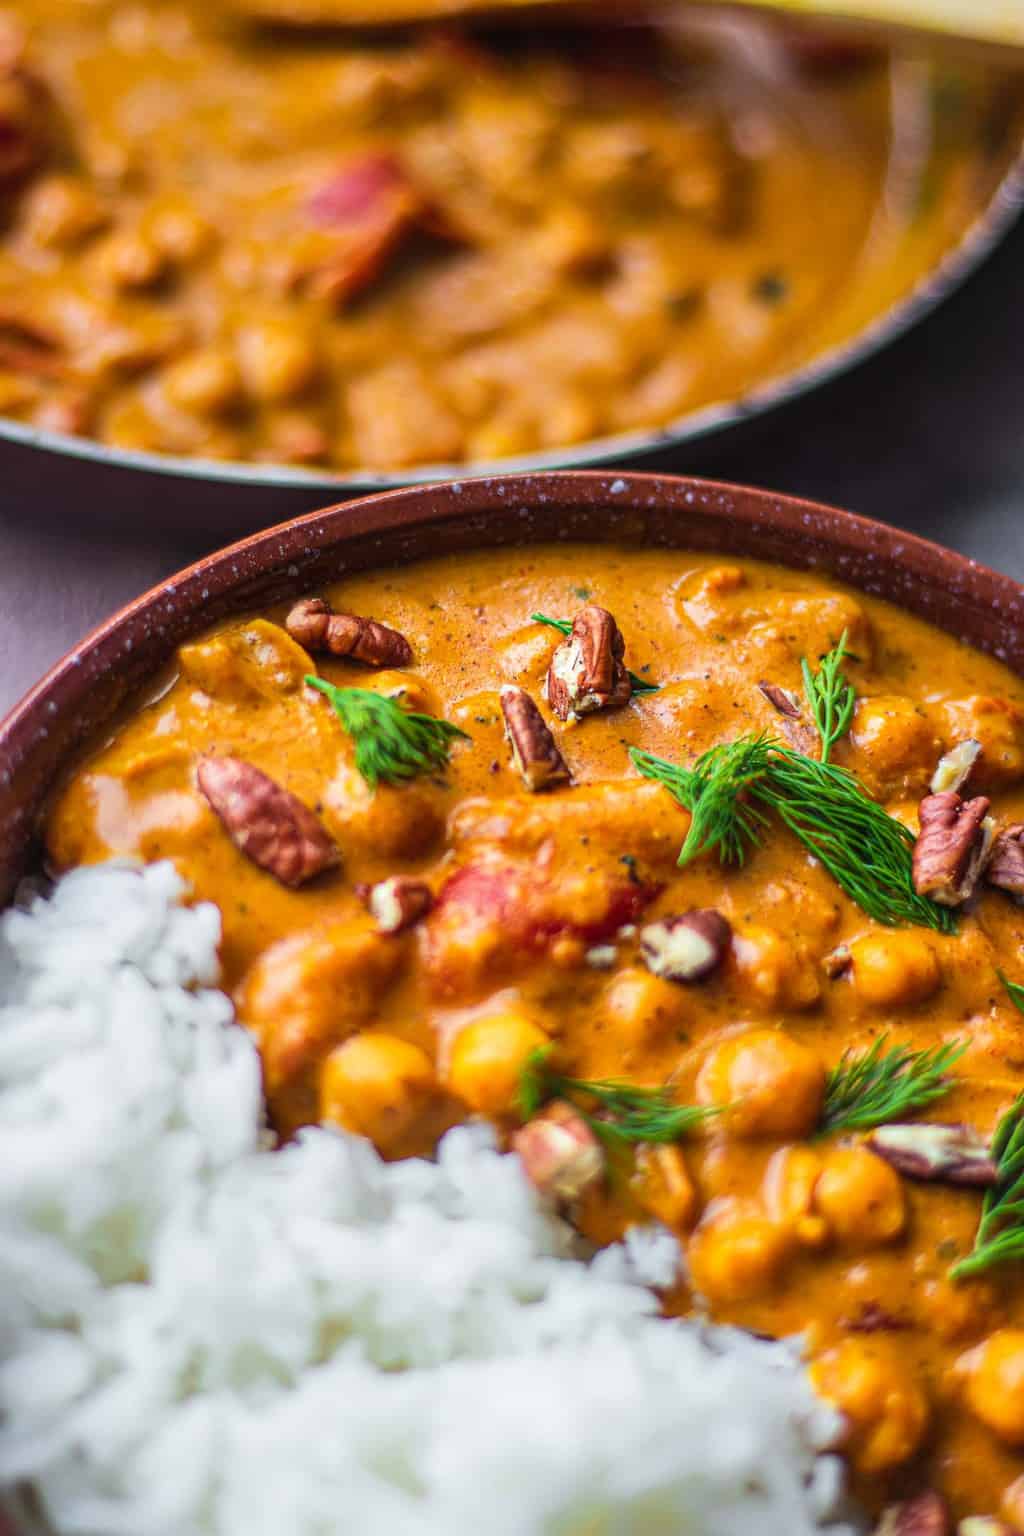 Bowl of vegan chickpeas in a curry sauce